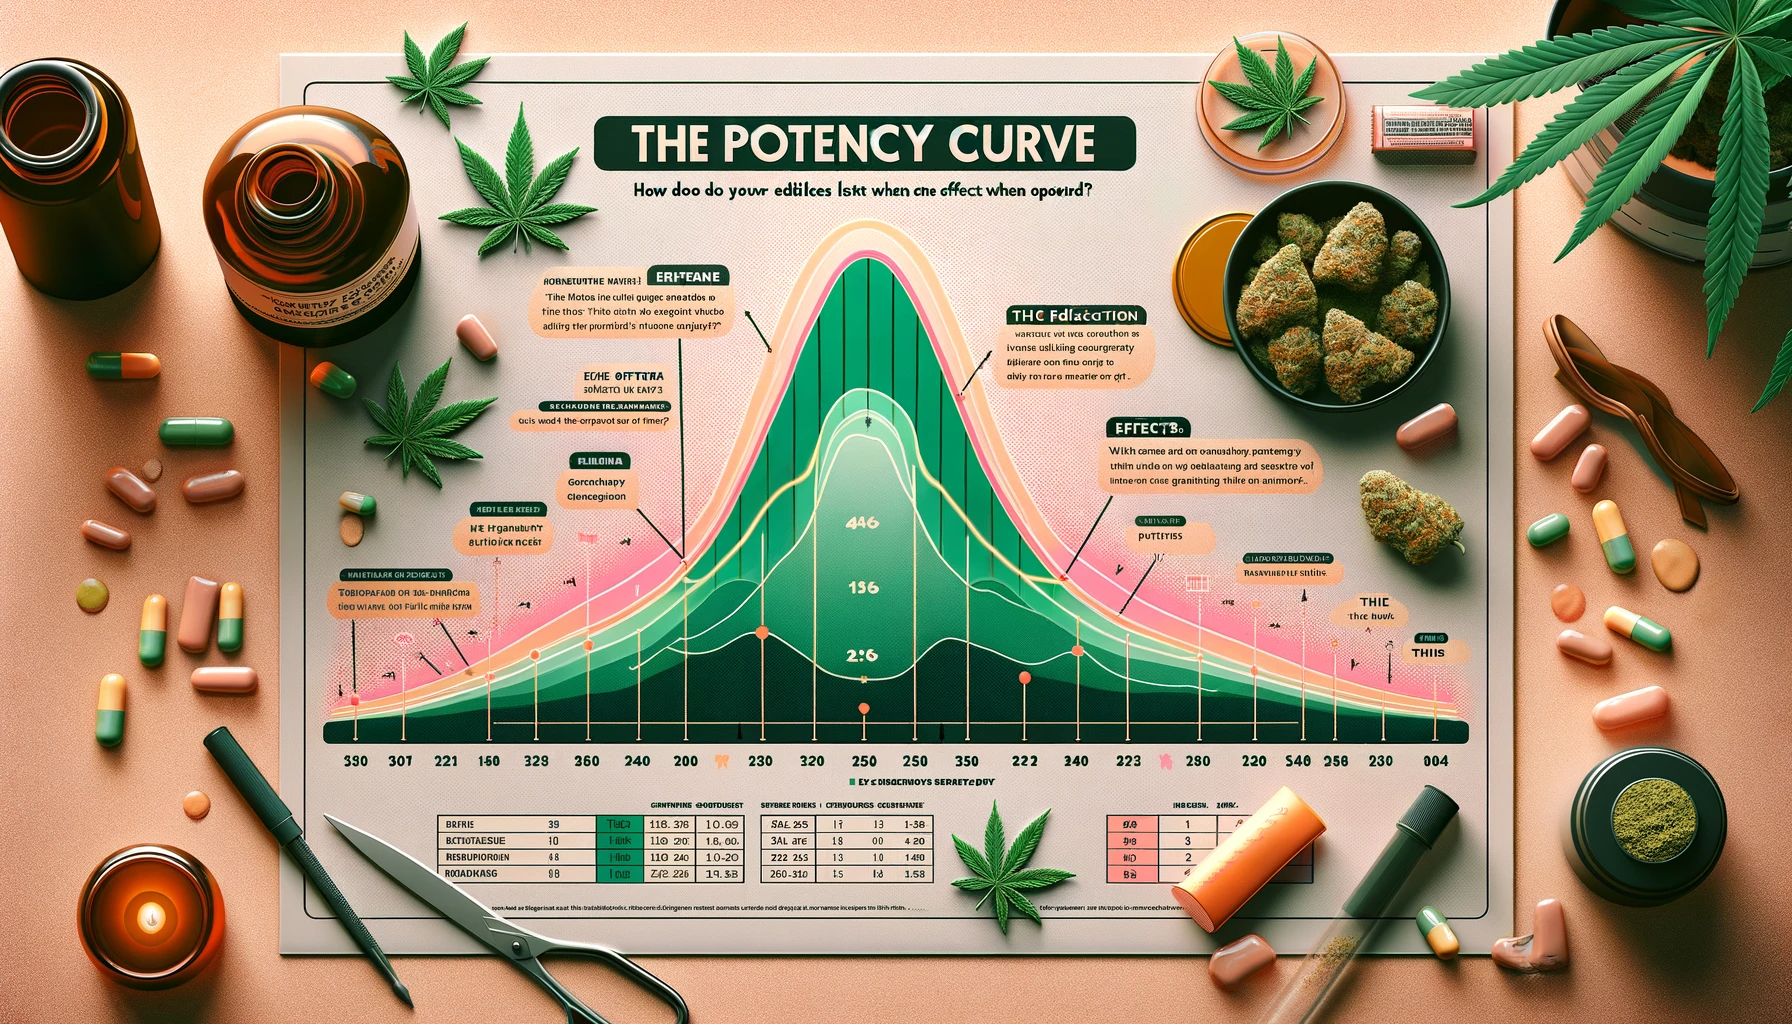 An image depicting the potency curve of a THC edible